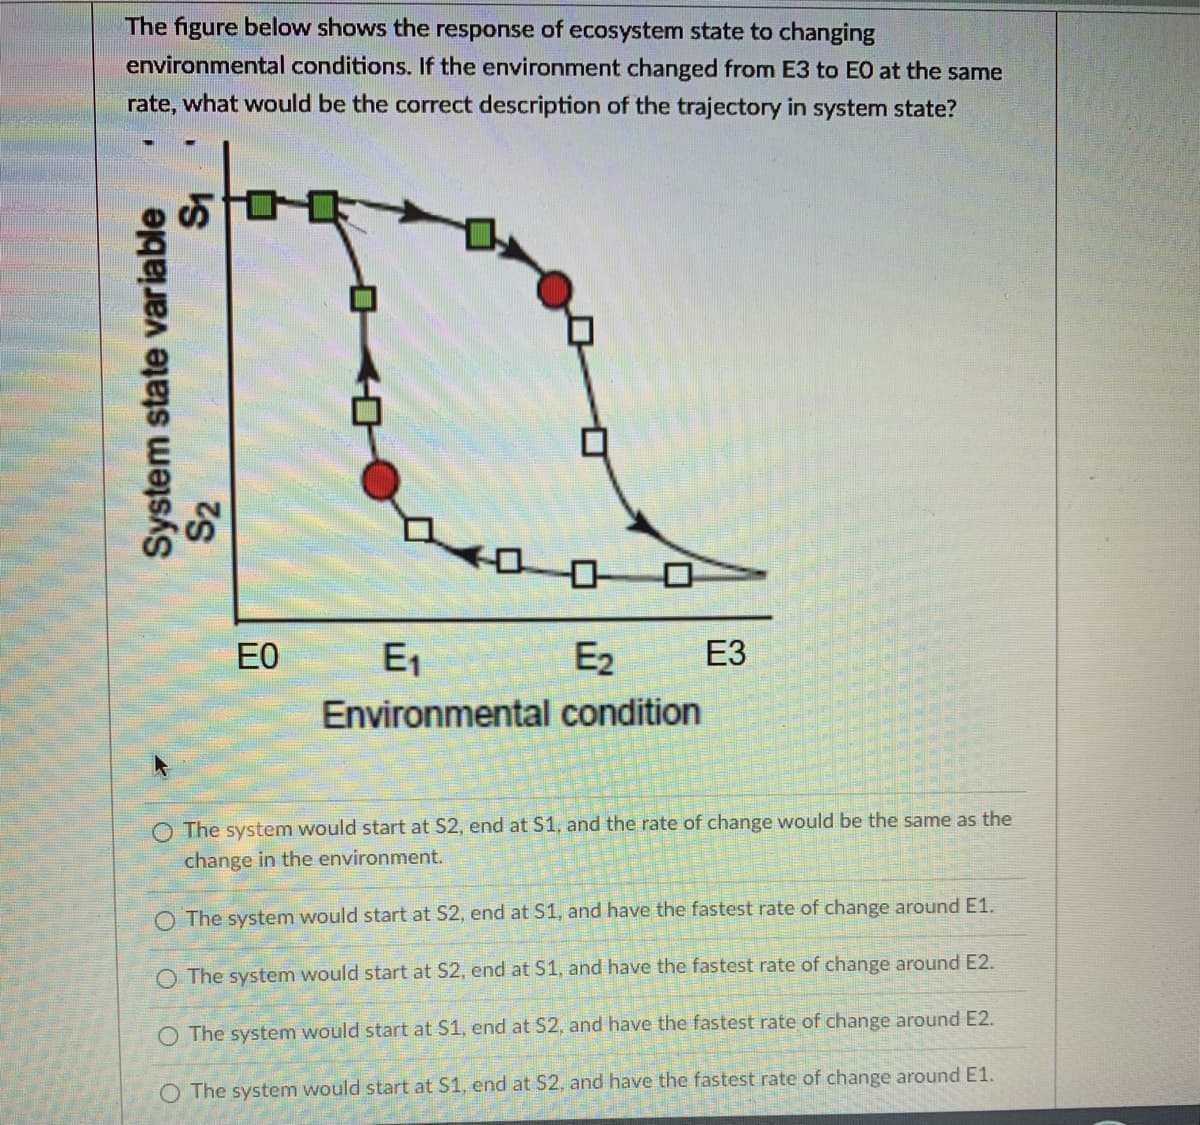 The figure below shows the response of ecosystem state to changing
environmental conditions. If the environment changed from E3 to EO at the same
rate, what would be the correct description of the trajectory in system state?
E0
E1
E2
ЕЗ
Environmental condition
O The system would start at S2, end at S1, and the rate of change would be the same as the
change in the environment.
The system would start at S2, end at S1, and have the fastest rate of change around E1.
O The system would start at S2, end at S1, and have the fastest rate of change around E2.
O The system would start at S1, end at S2, and have the fastest rate of change around E2.
O The system would start at S1, end at S2, and have the fastest rate of change around E1.
System state variable
S2
